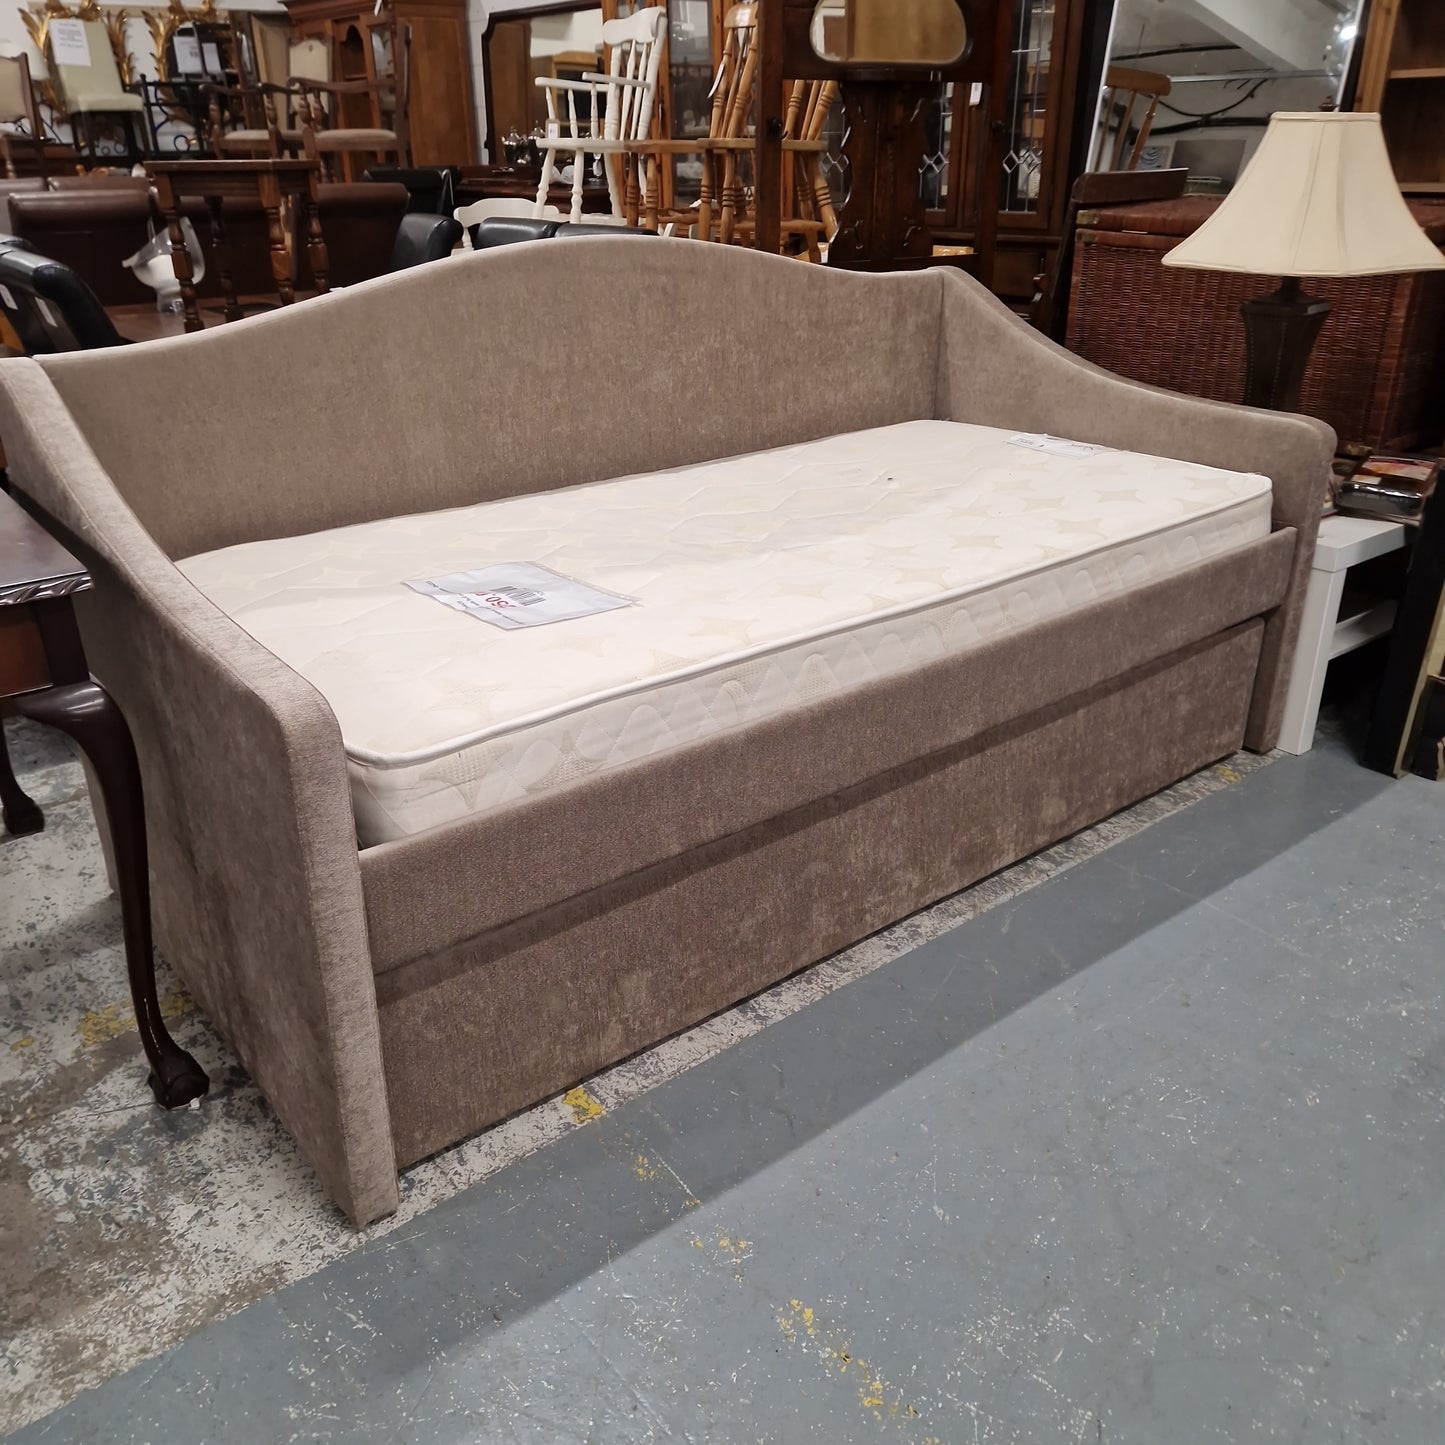 Light brown fabric seater sofa bed cw mattresses